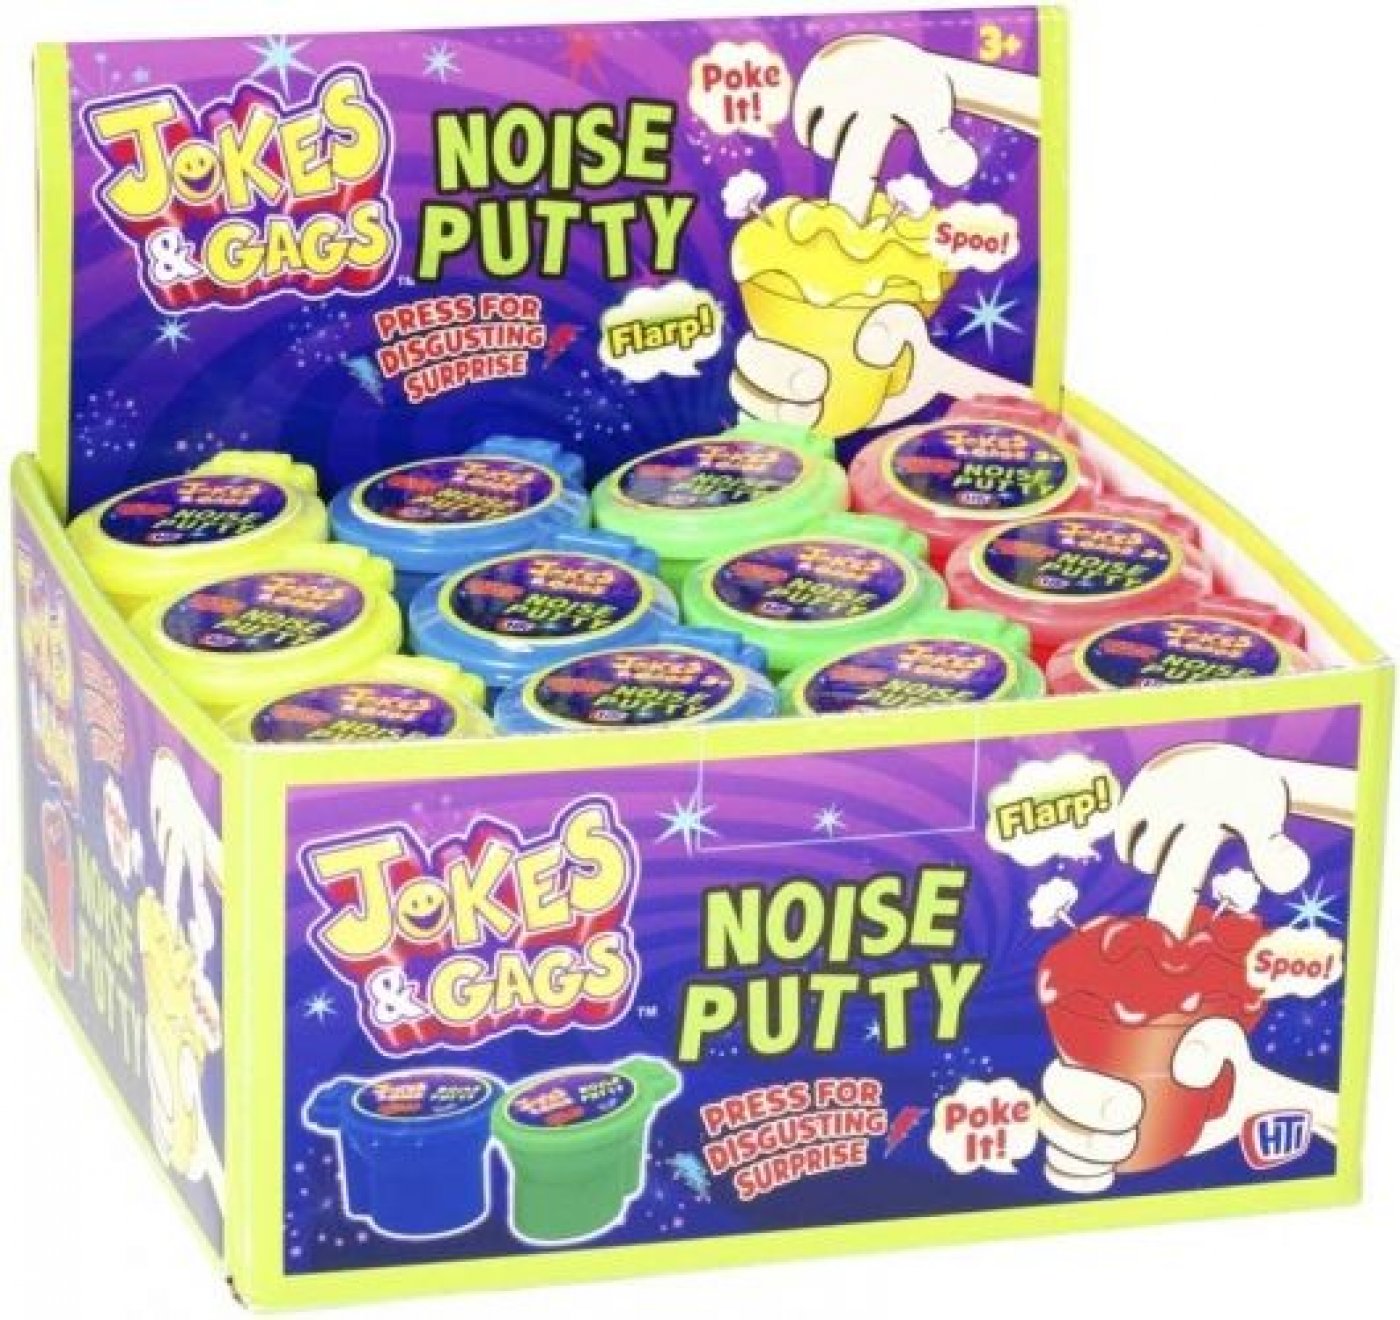 Inodoro Noise Putty Jokes And Gags Con Sonido Y Slime